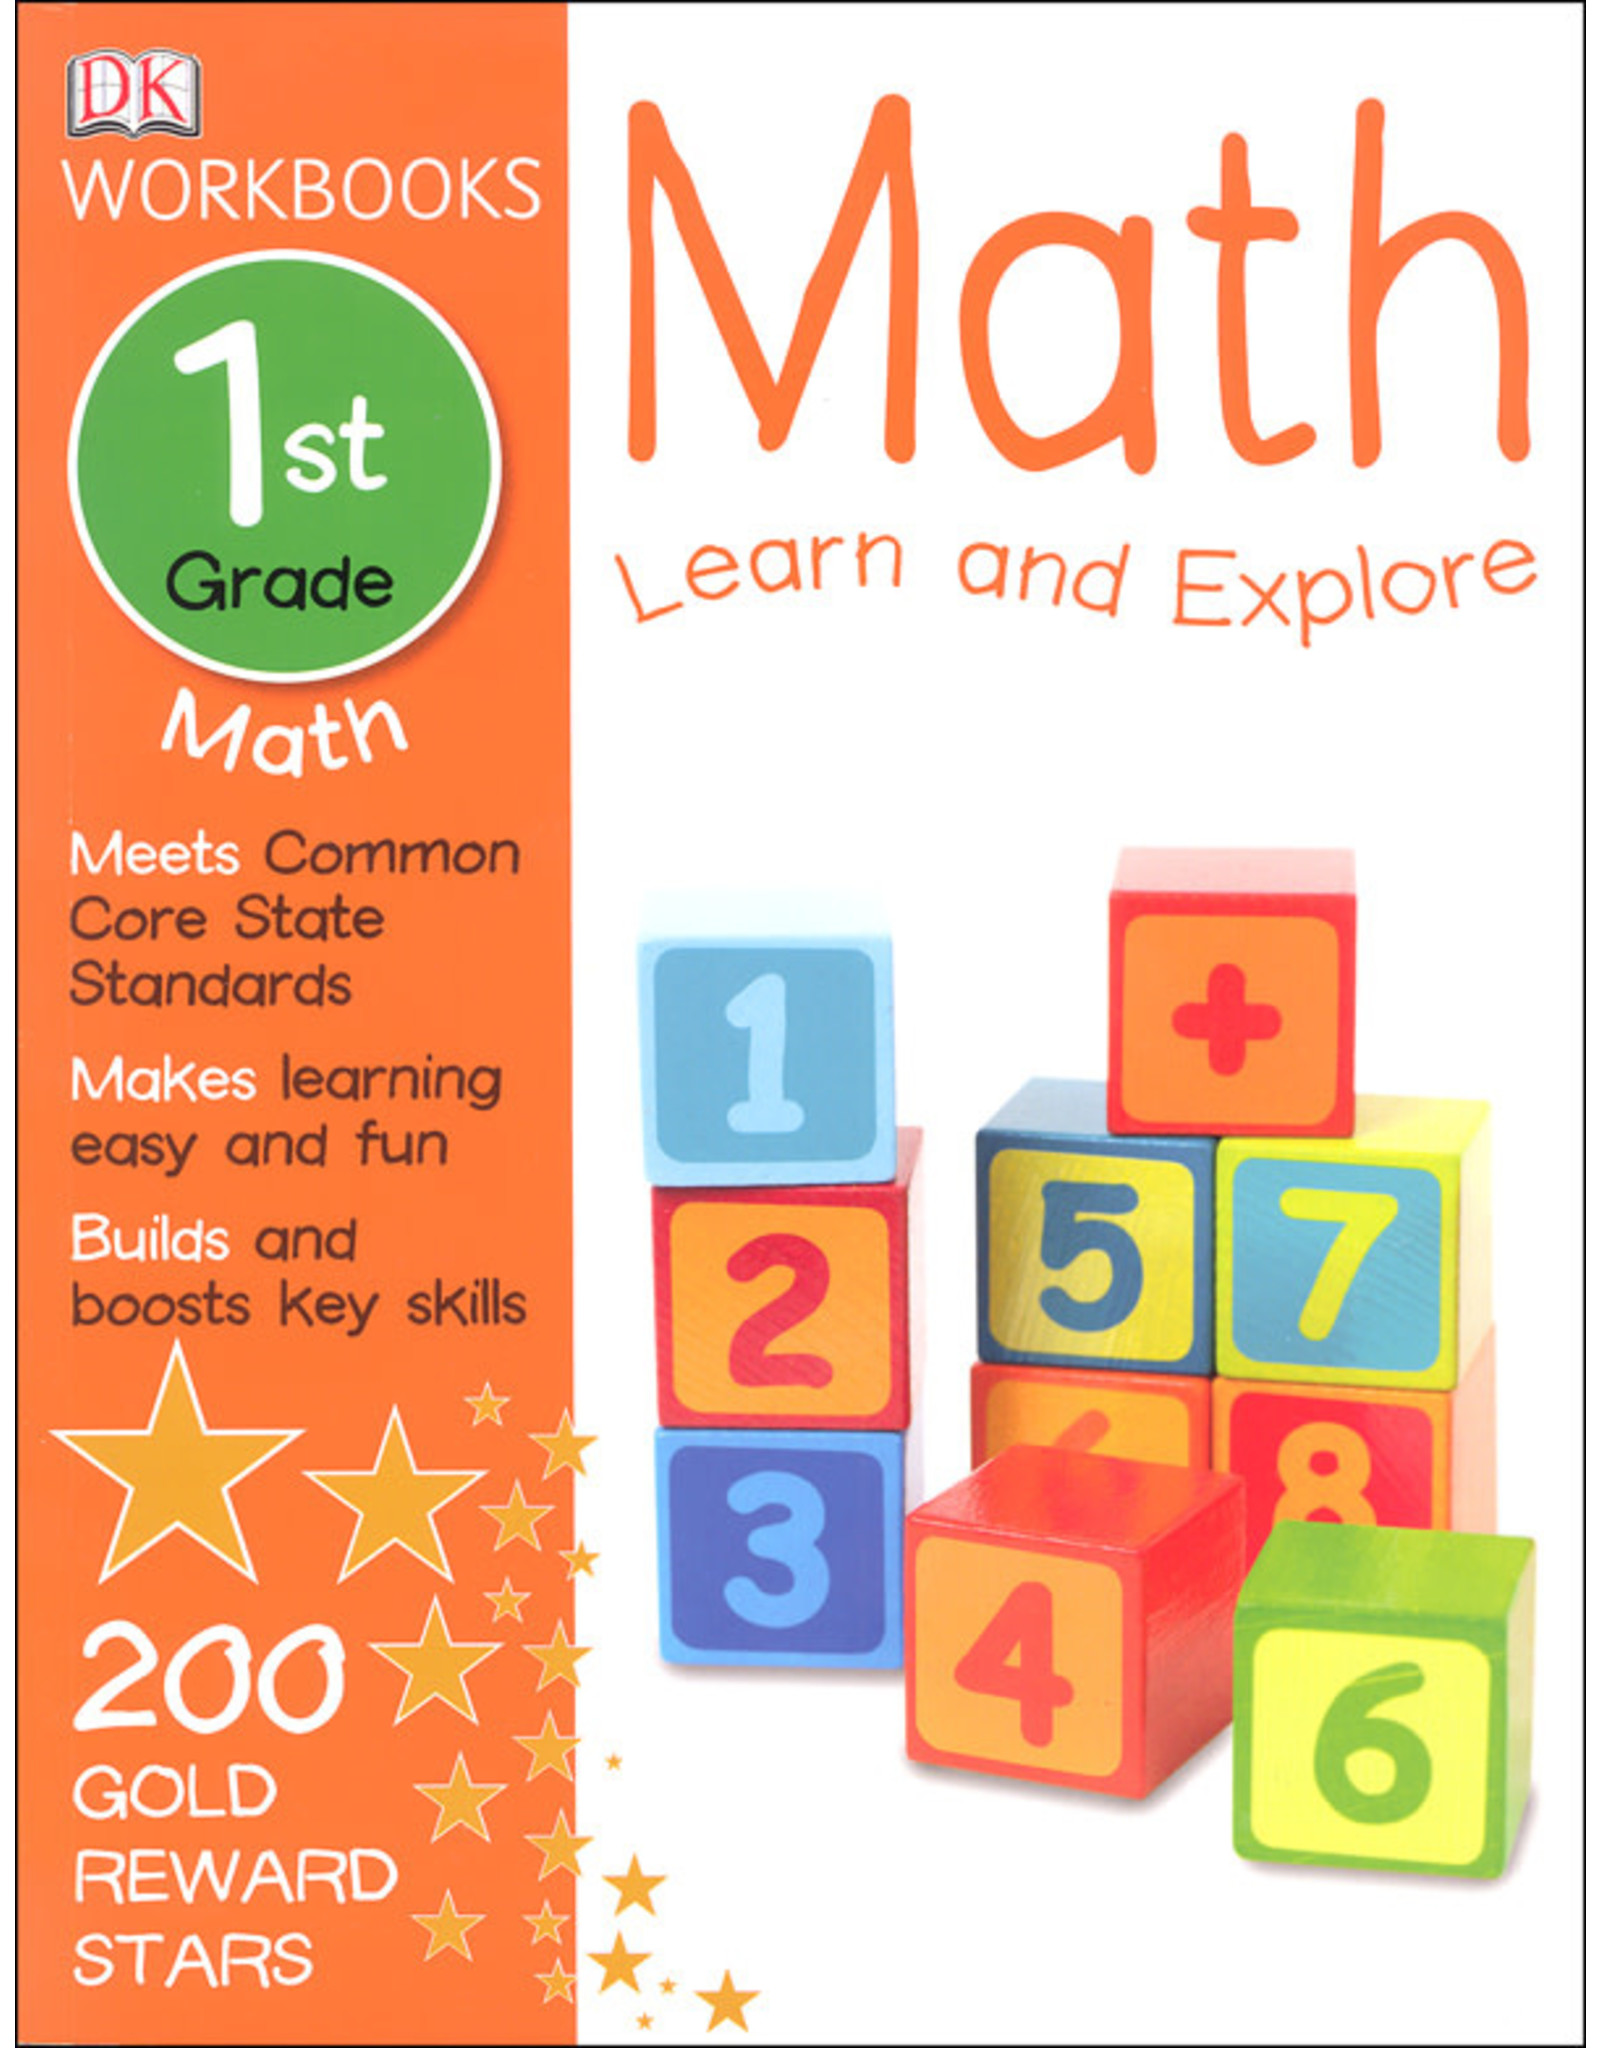 1st Grade Math Learn and Explore